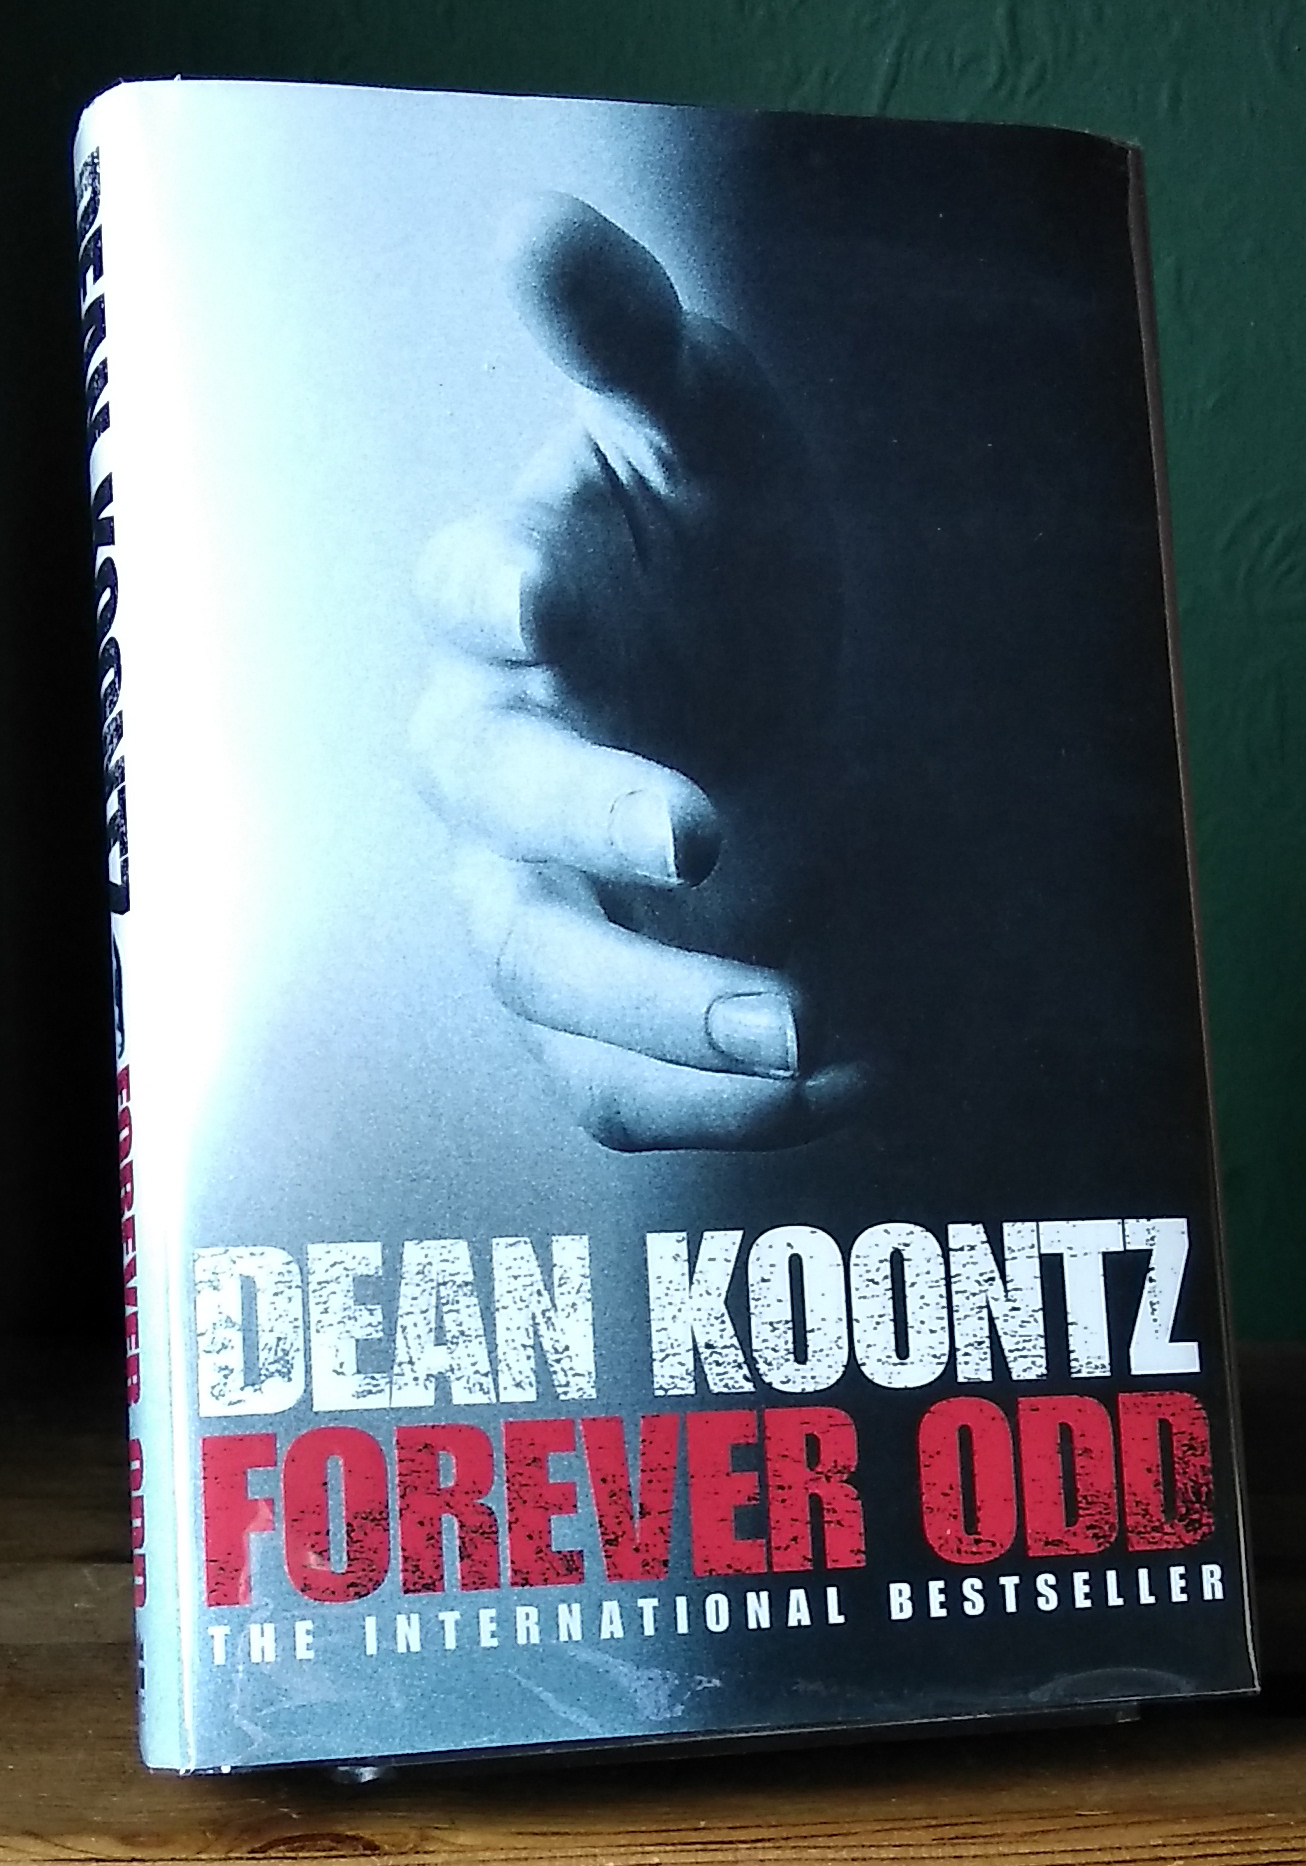 Forever Odd UK First Edition